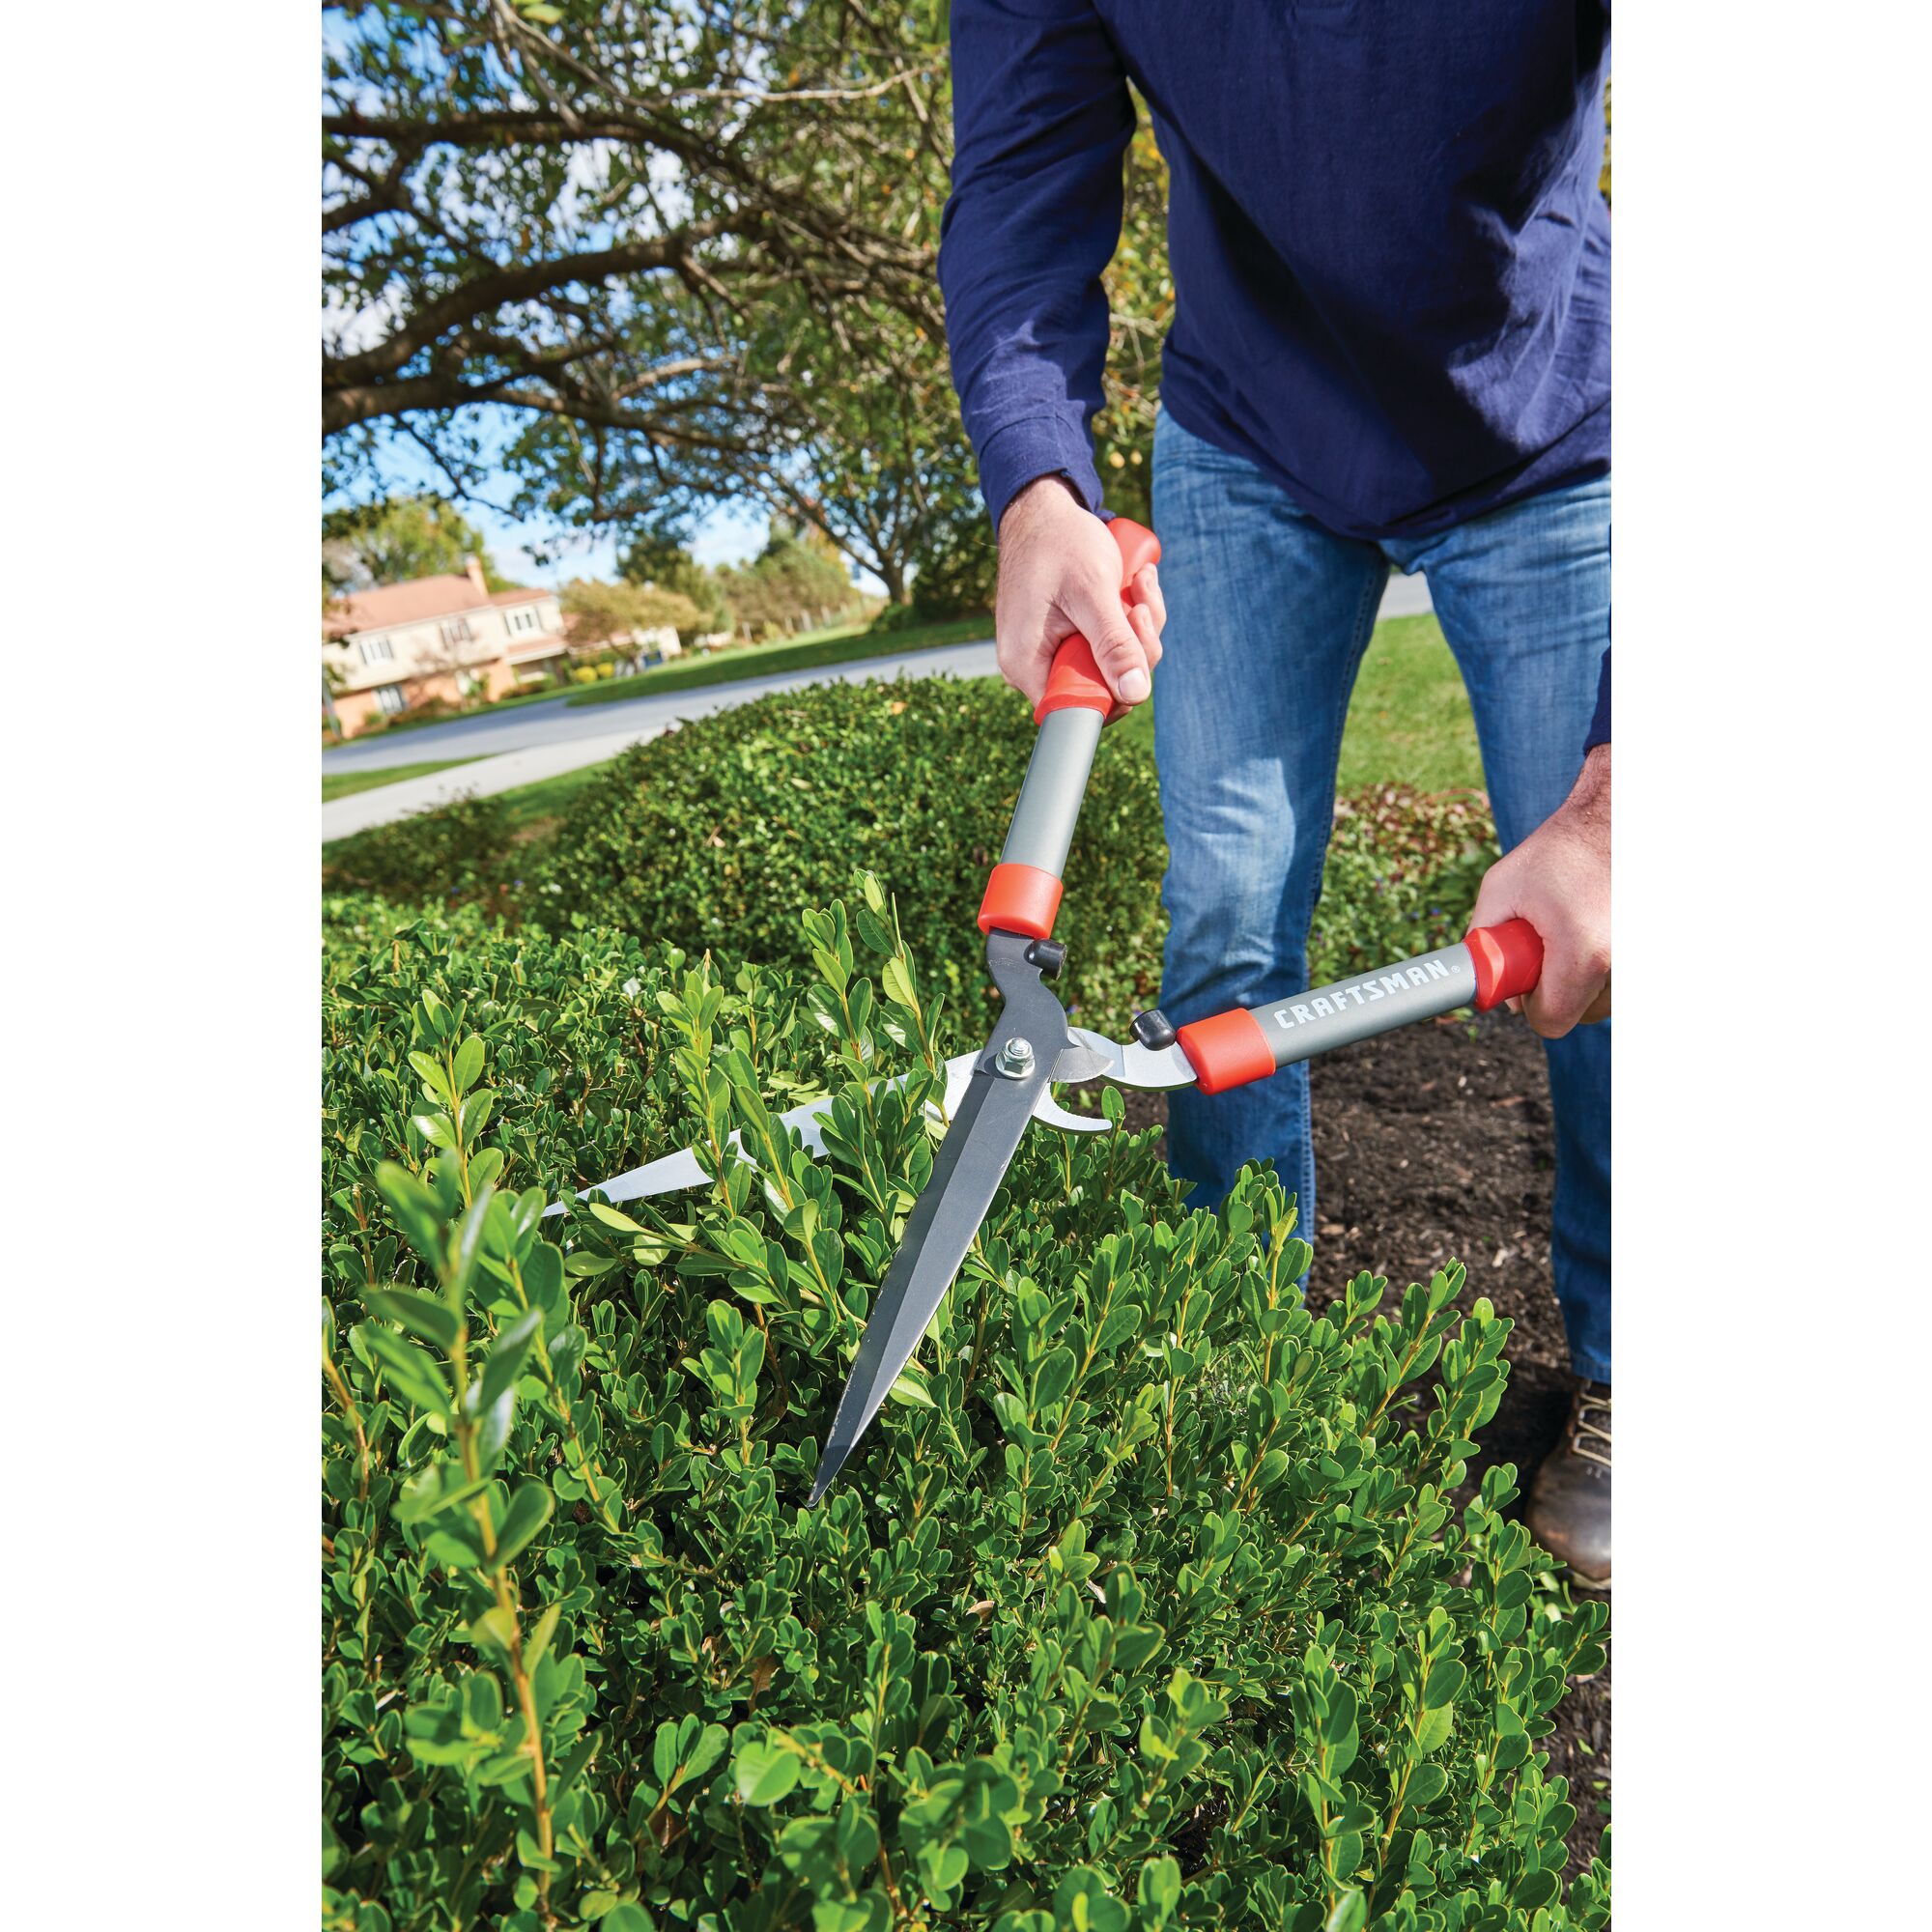 Multi purpose hedge shears being used by a person to trim a hedge.